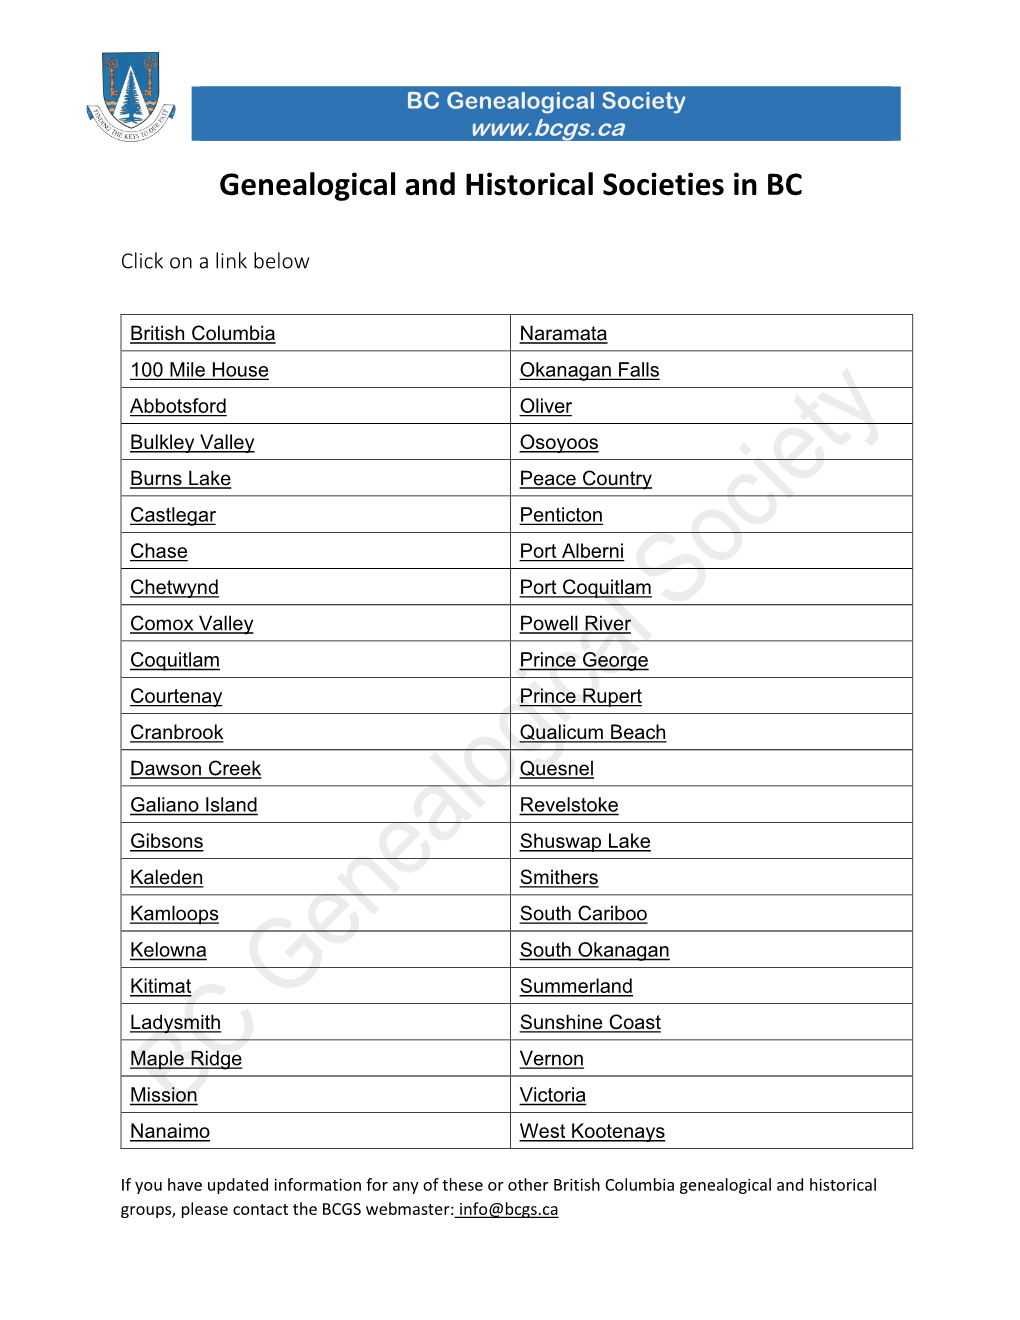 Genealogical and Historical Societies in BC